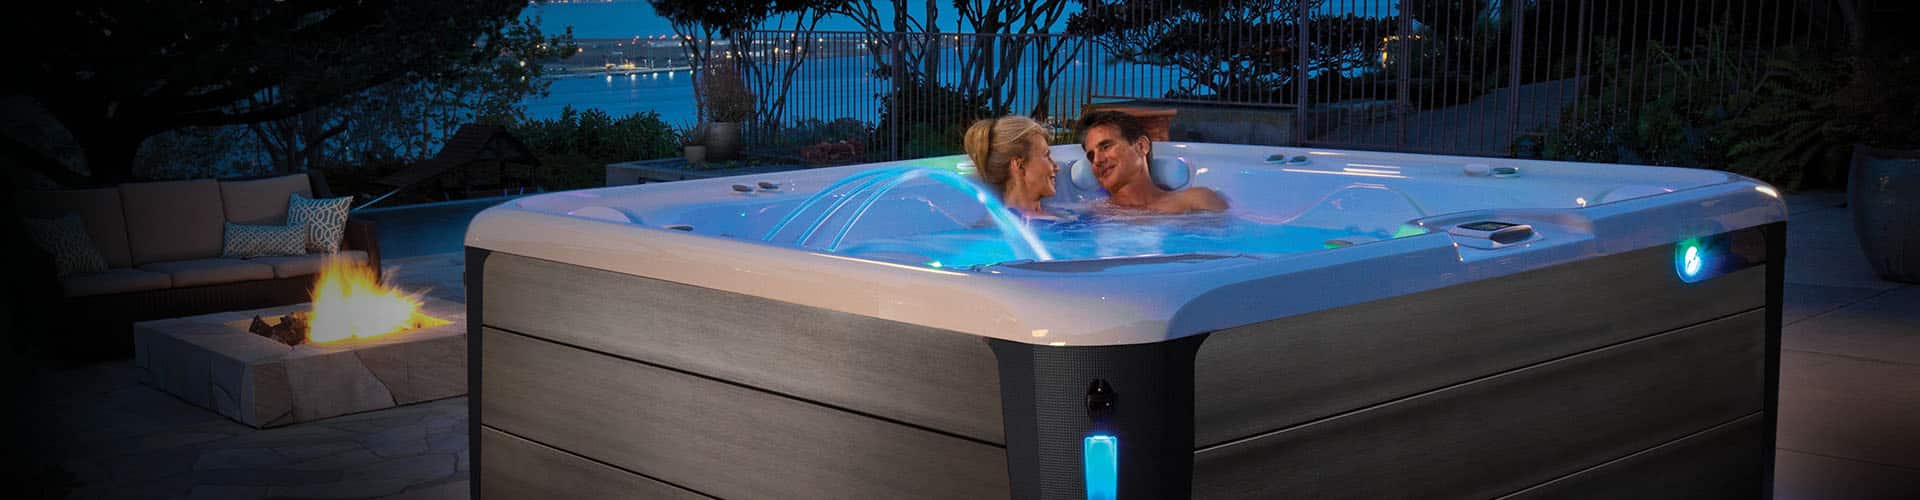 The Highlife® Collection from Hot Spring Spas: Luxury Hot Tubs For Those Who Expect the Most Out of Life